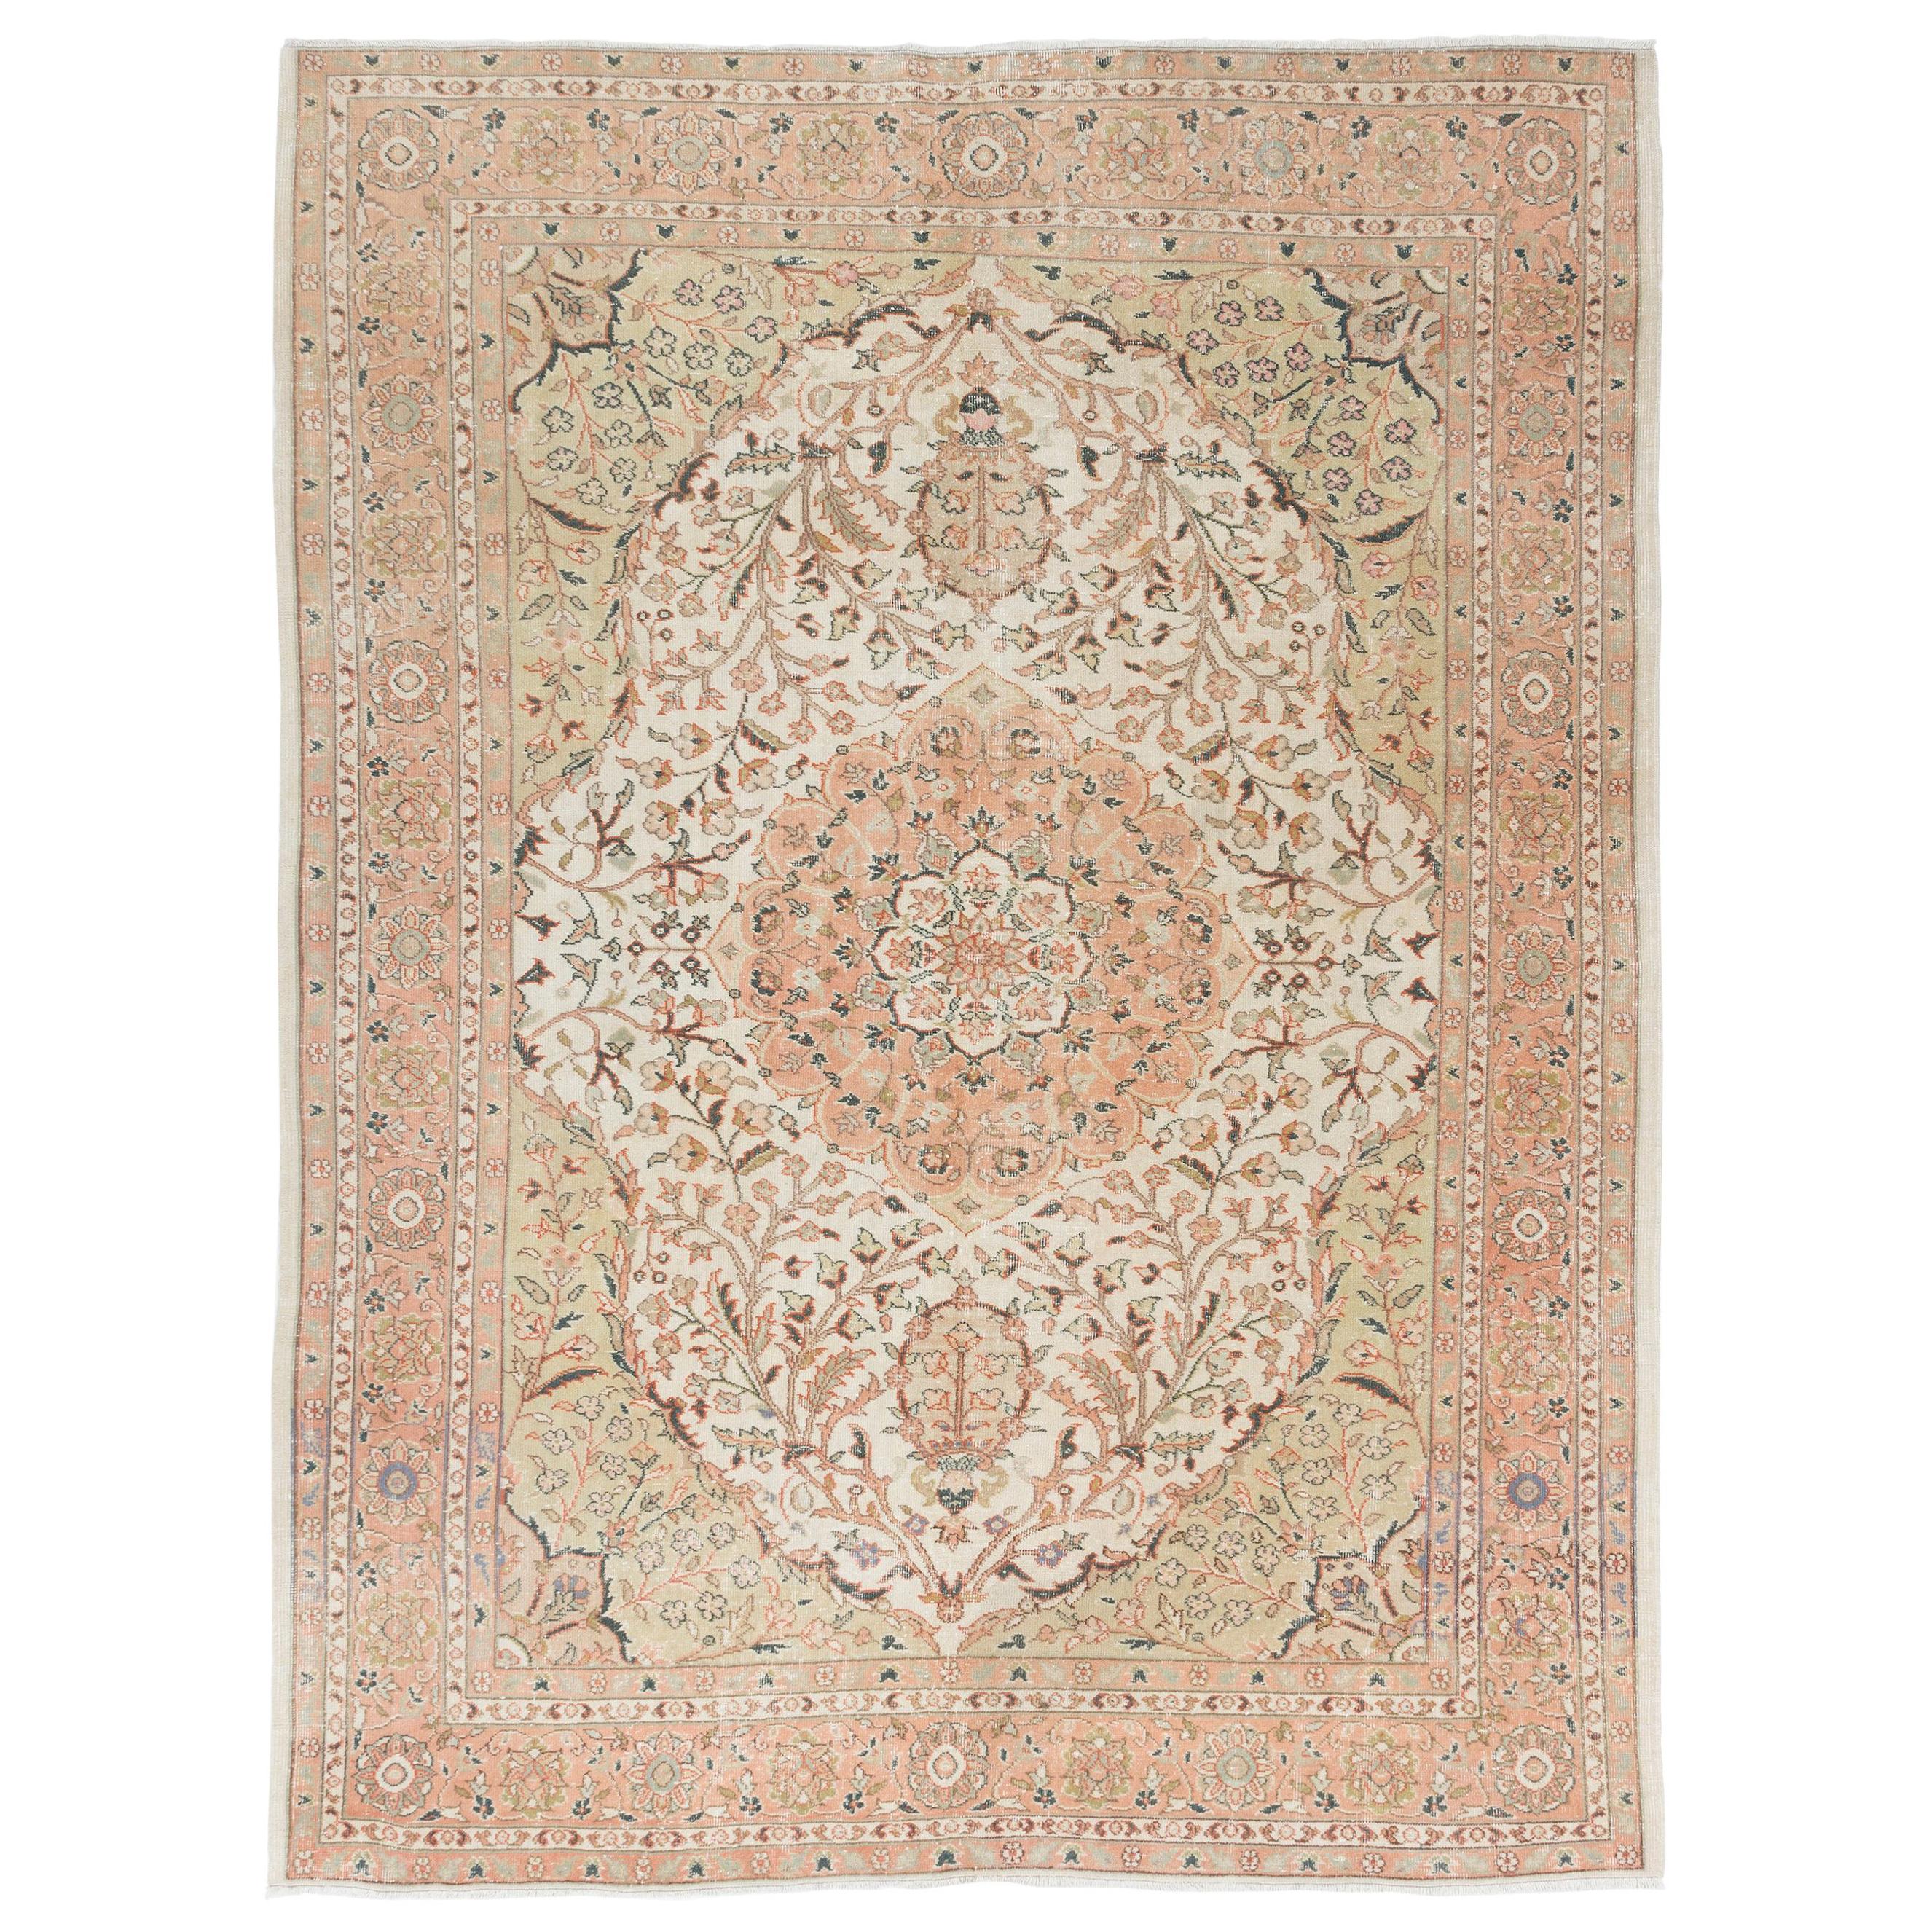 7.2x9.4 Ft One of a Kind Hand-knotted Fine Vintage Ladik Wool Rug in Soft Colors